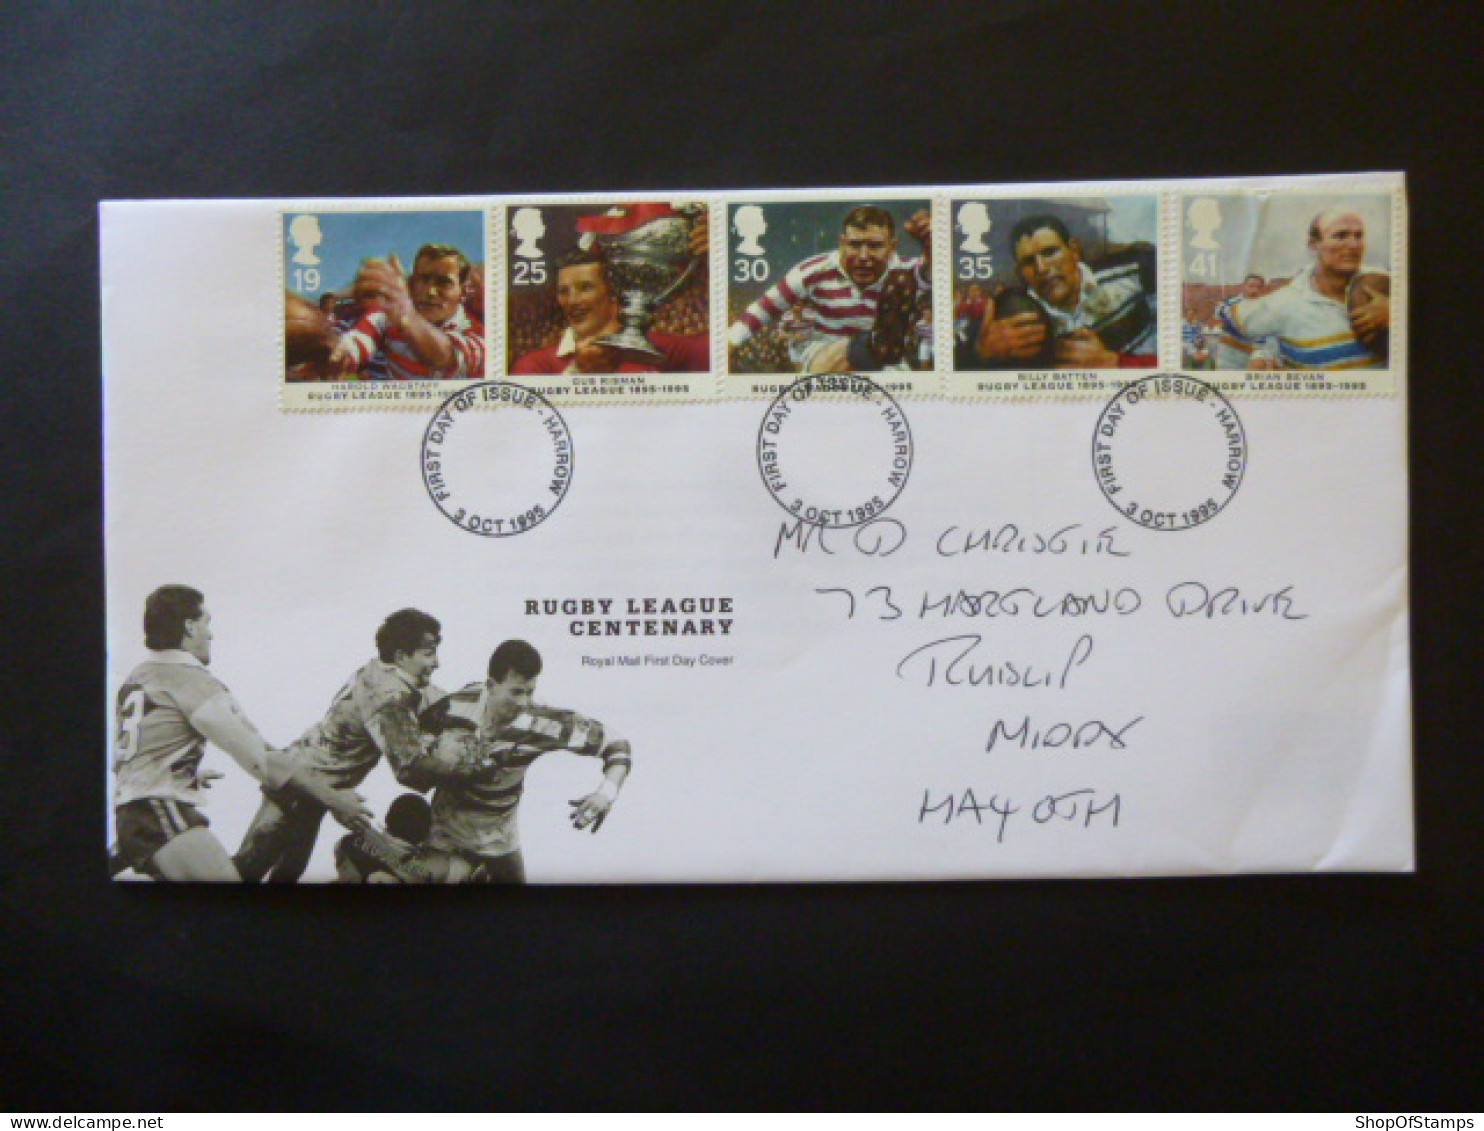 GREAT BRITAIN SG 1891-94 RUGBY LEAGUE CENTENARY FDC HARROW - Unclassified